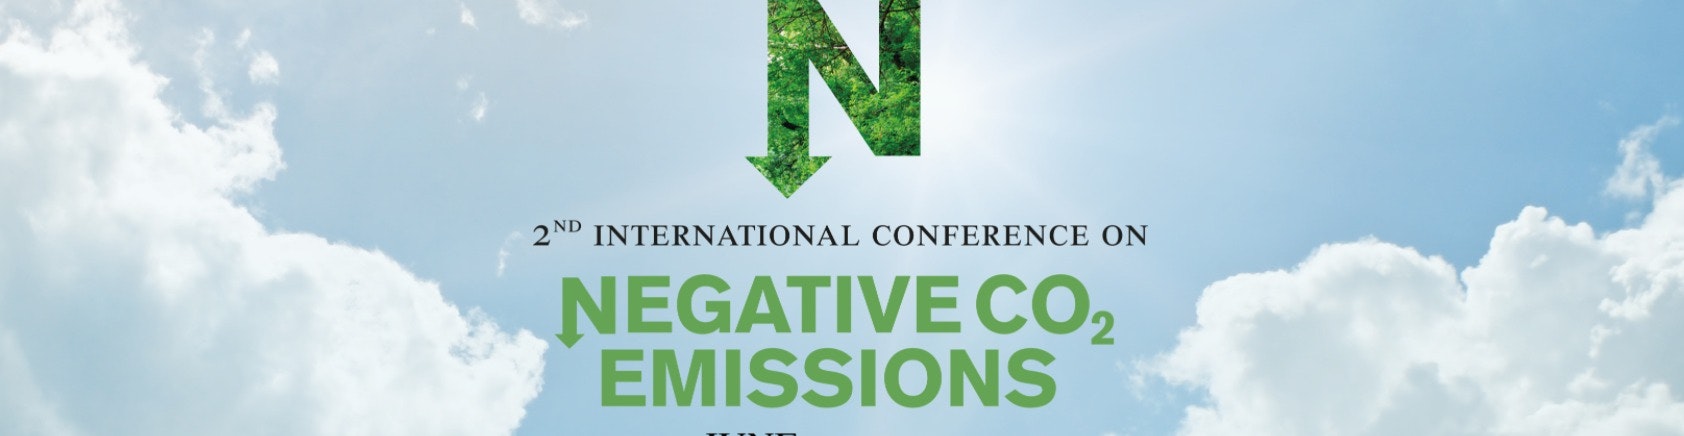 Cover image of 2nd International Conference on Negative CO2 Emissions